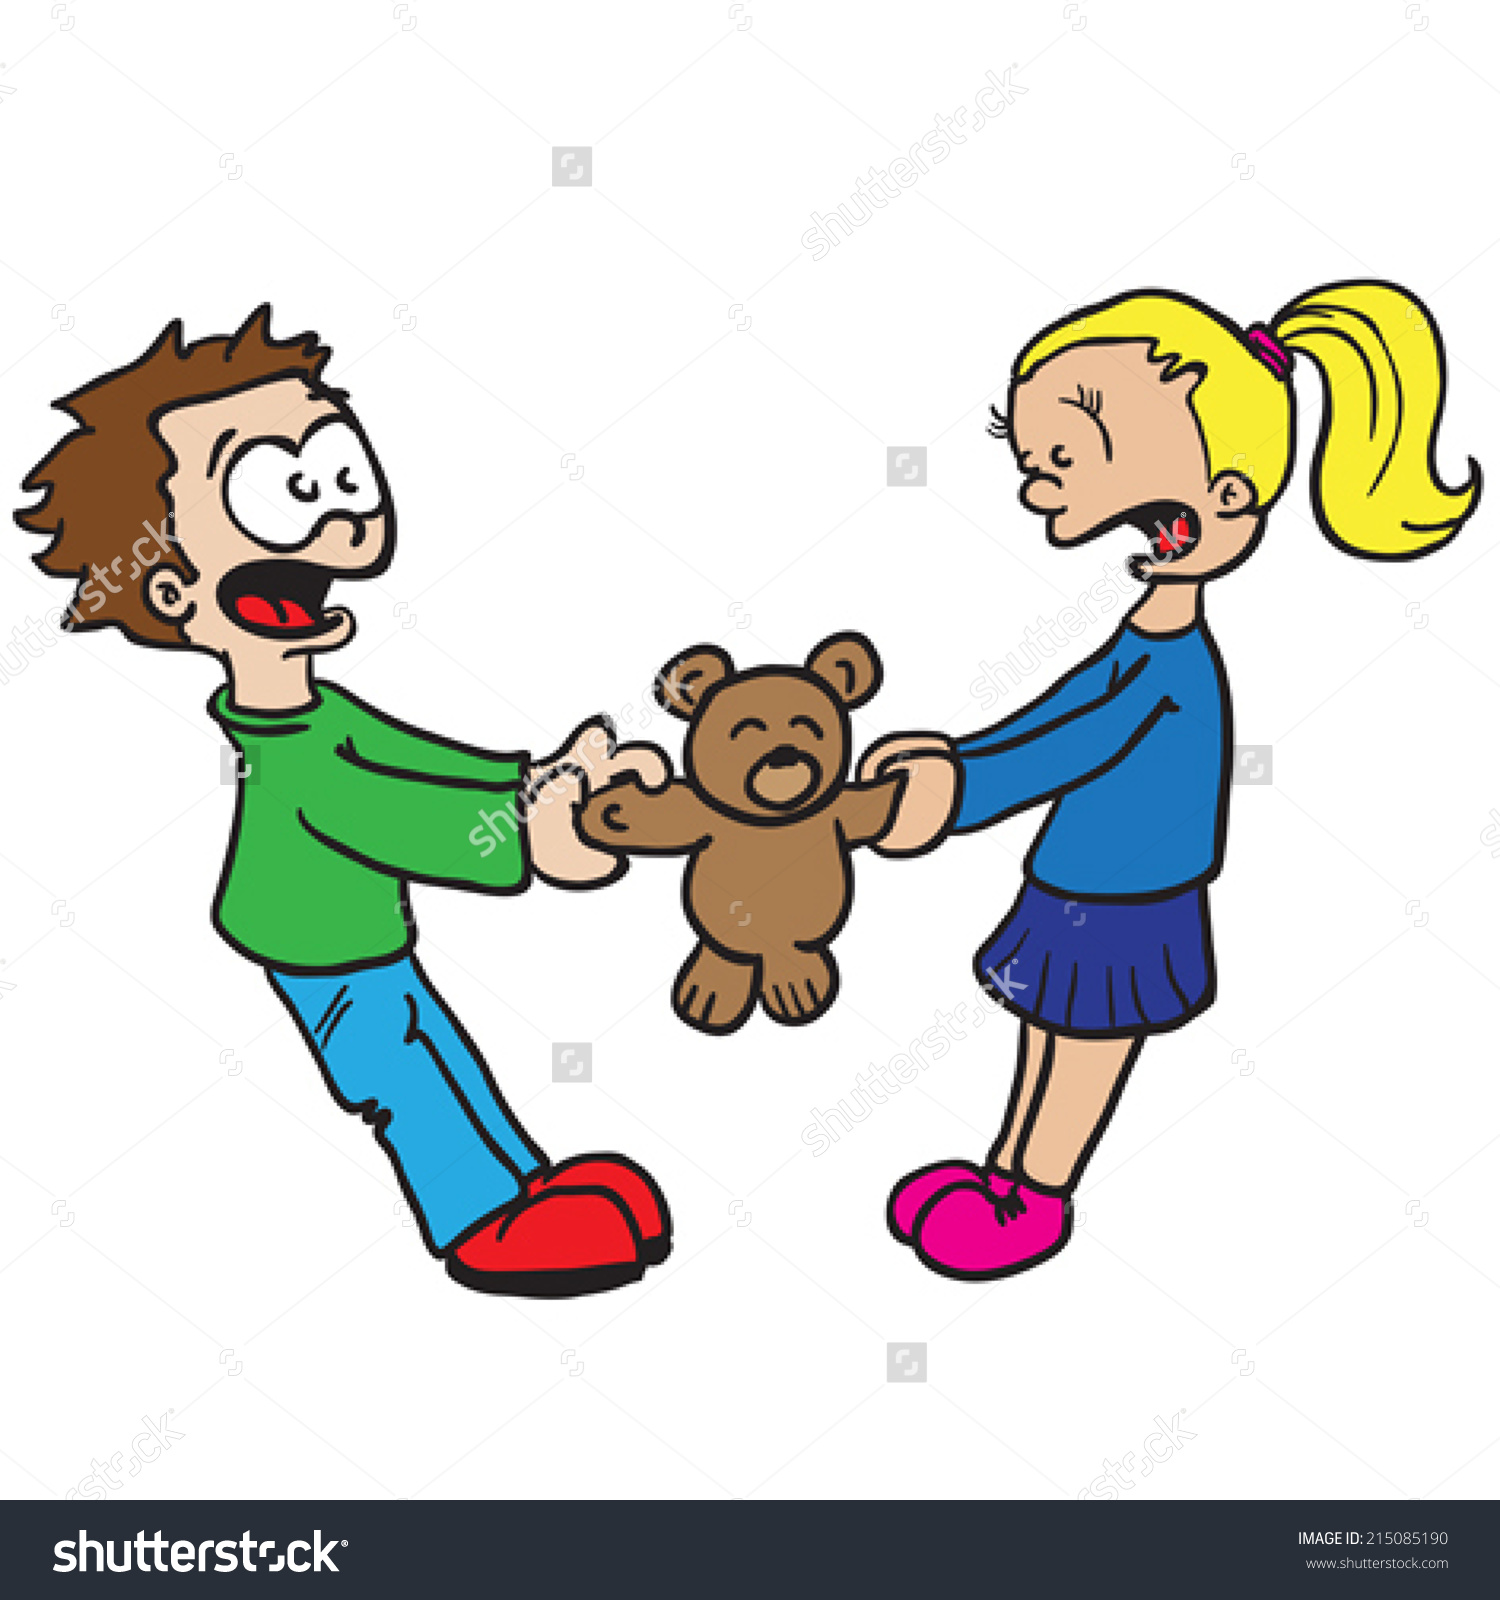 Two People Fighting Clipart | Free download on ClipArtMag
 Kids Argue Clipart